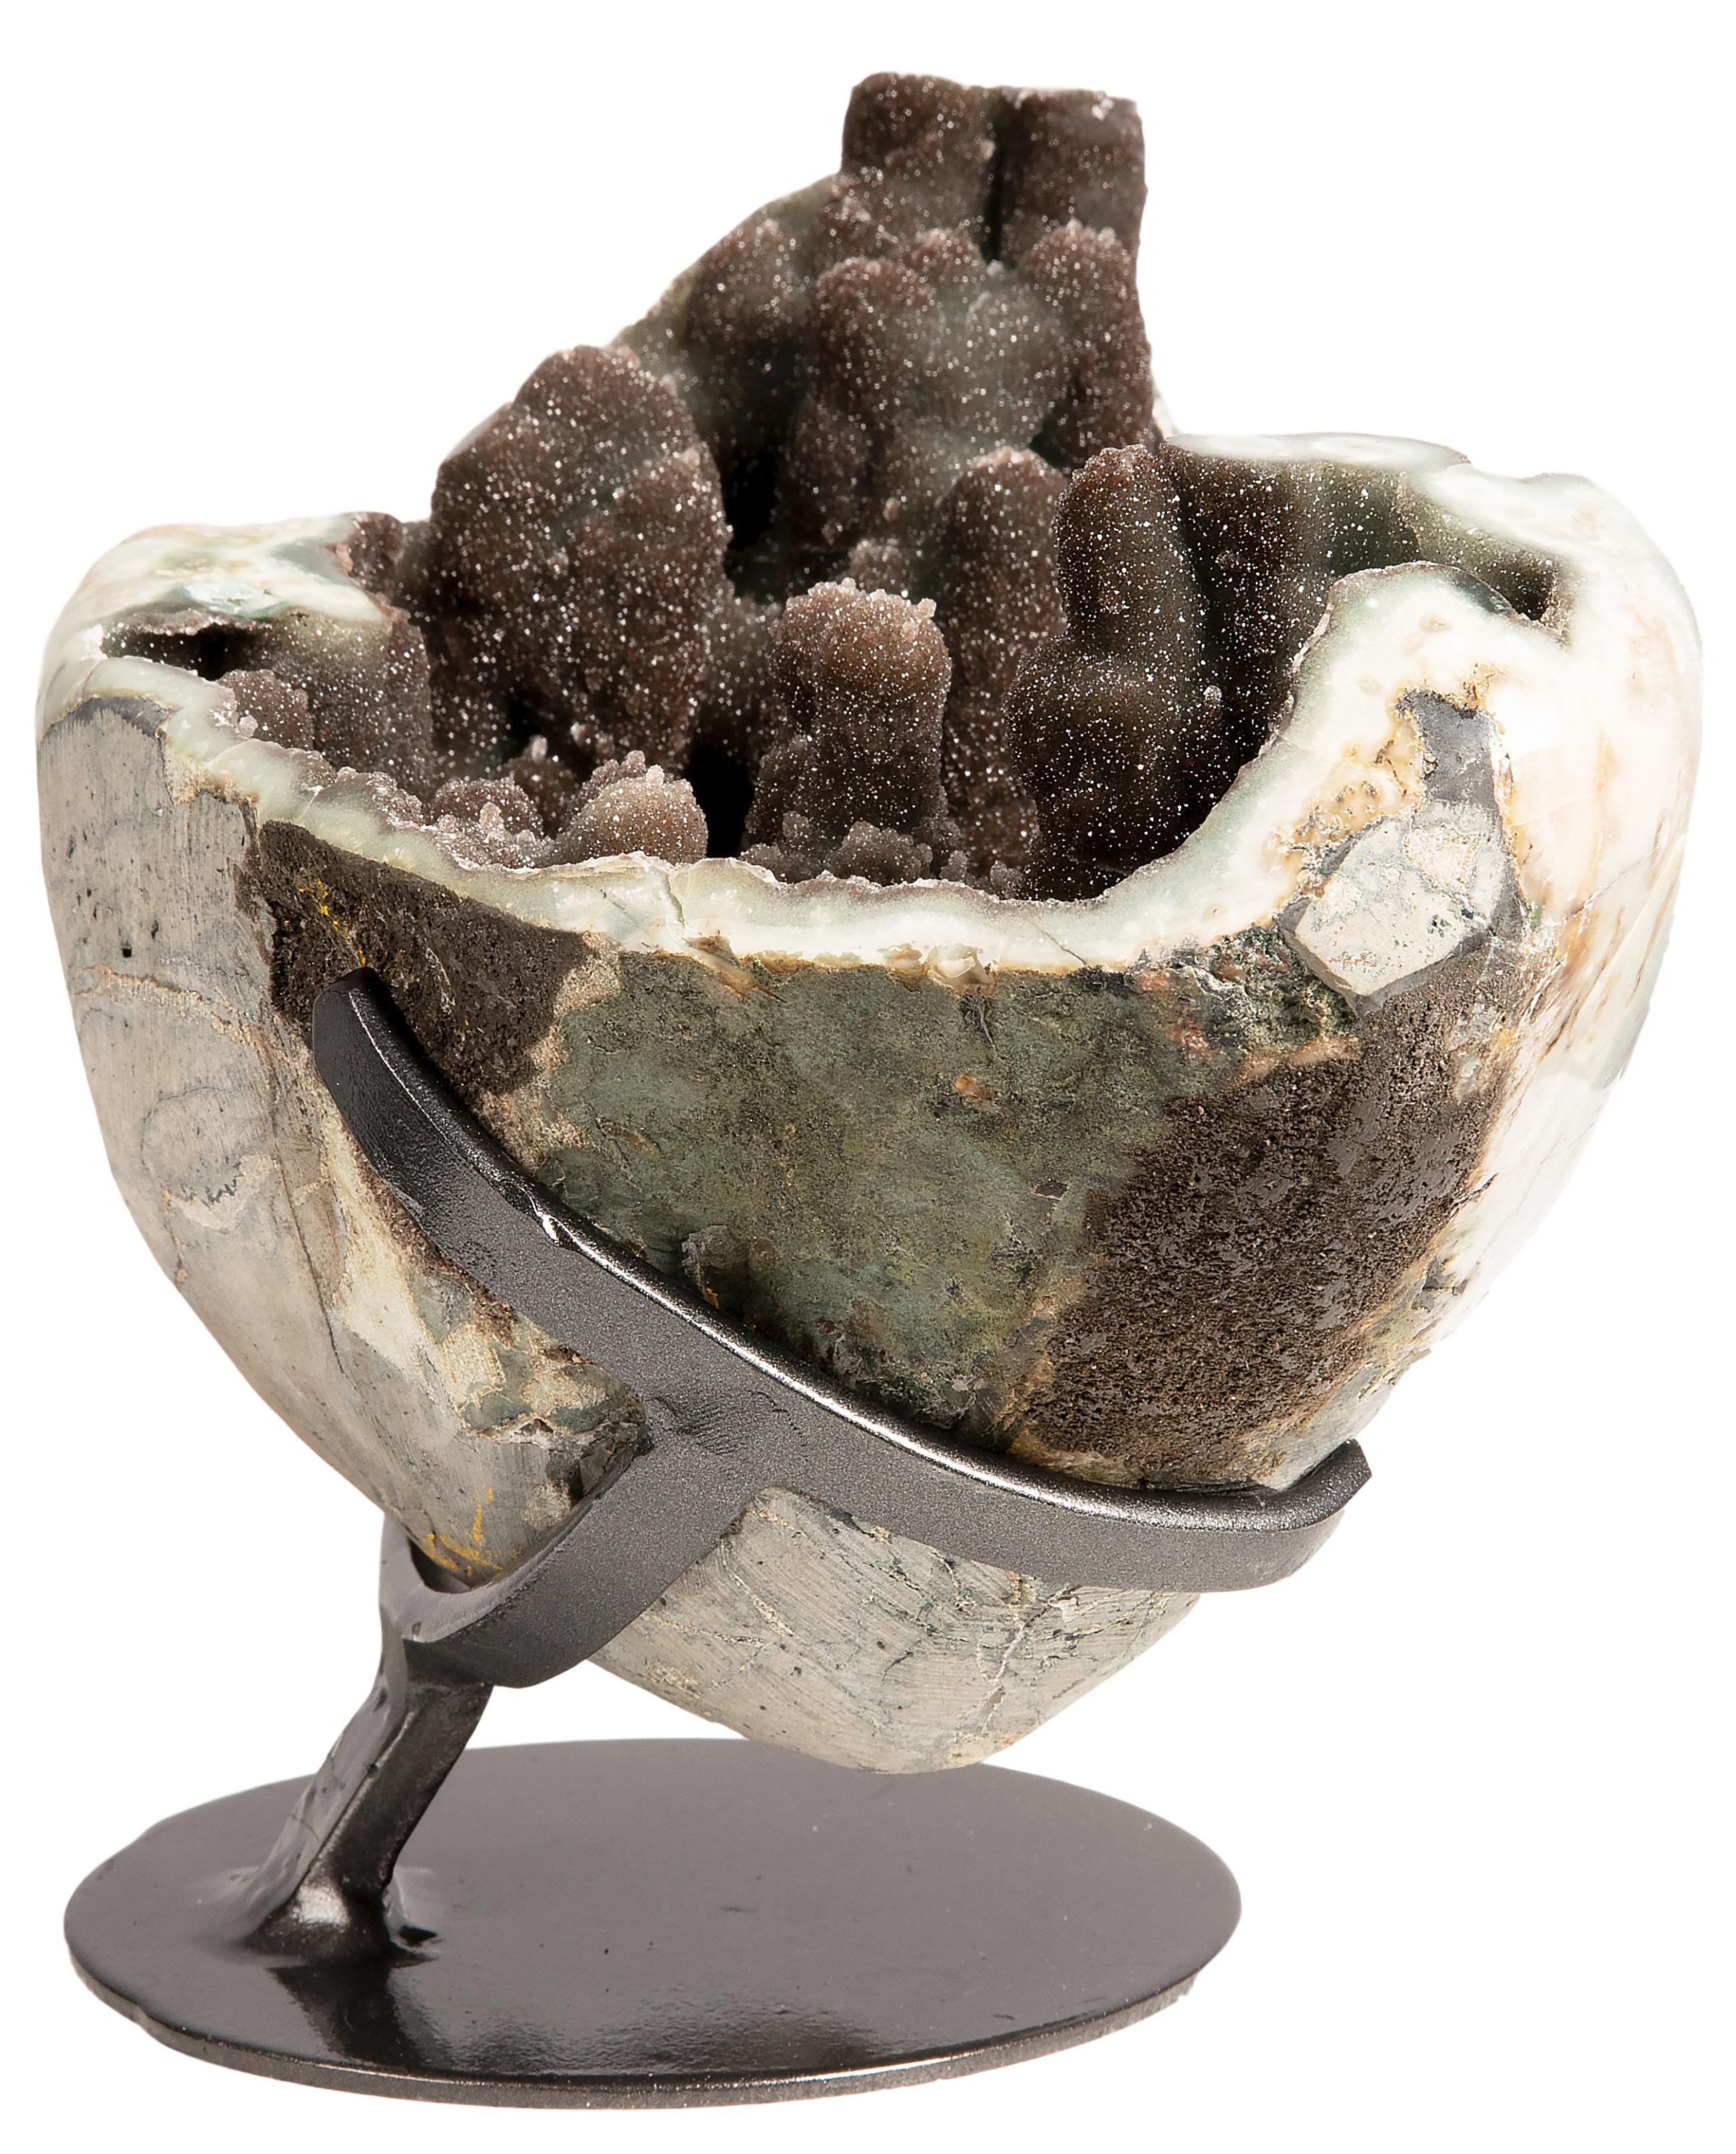 An exquisite brown druzy quartz stalactite cluster. 

The lower half of the geode is preserved, with the upper part removed to reveal the rare creation in its interior formed of many stalactites, resembling an otherworldly landscape. 



This